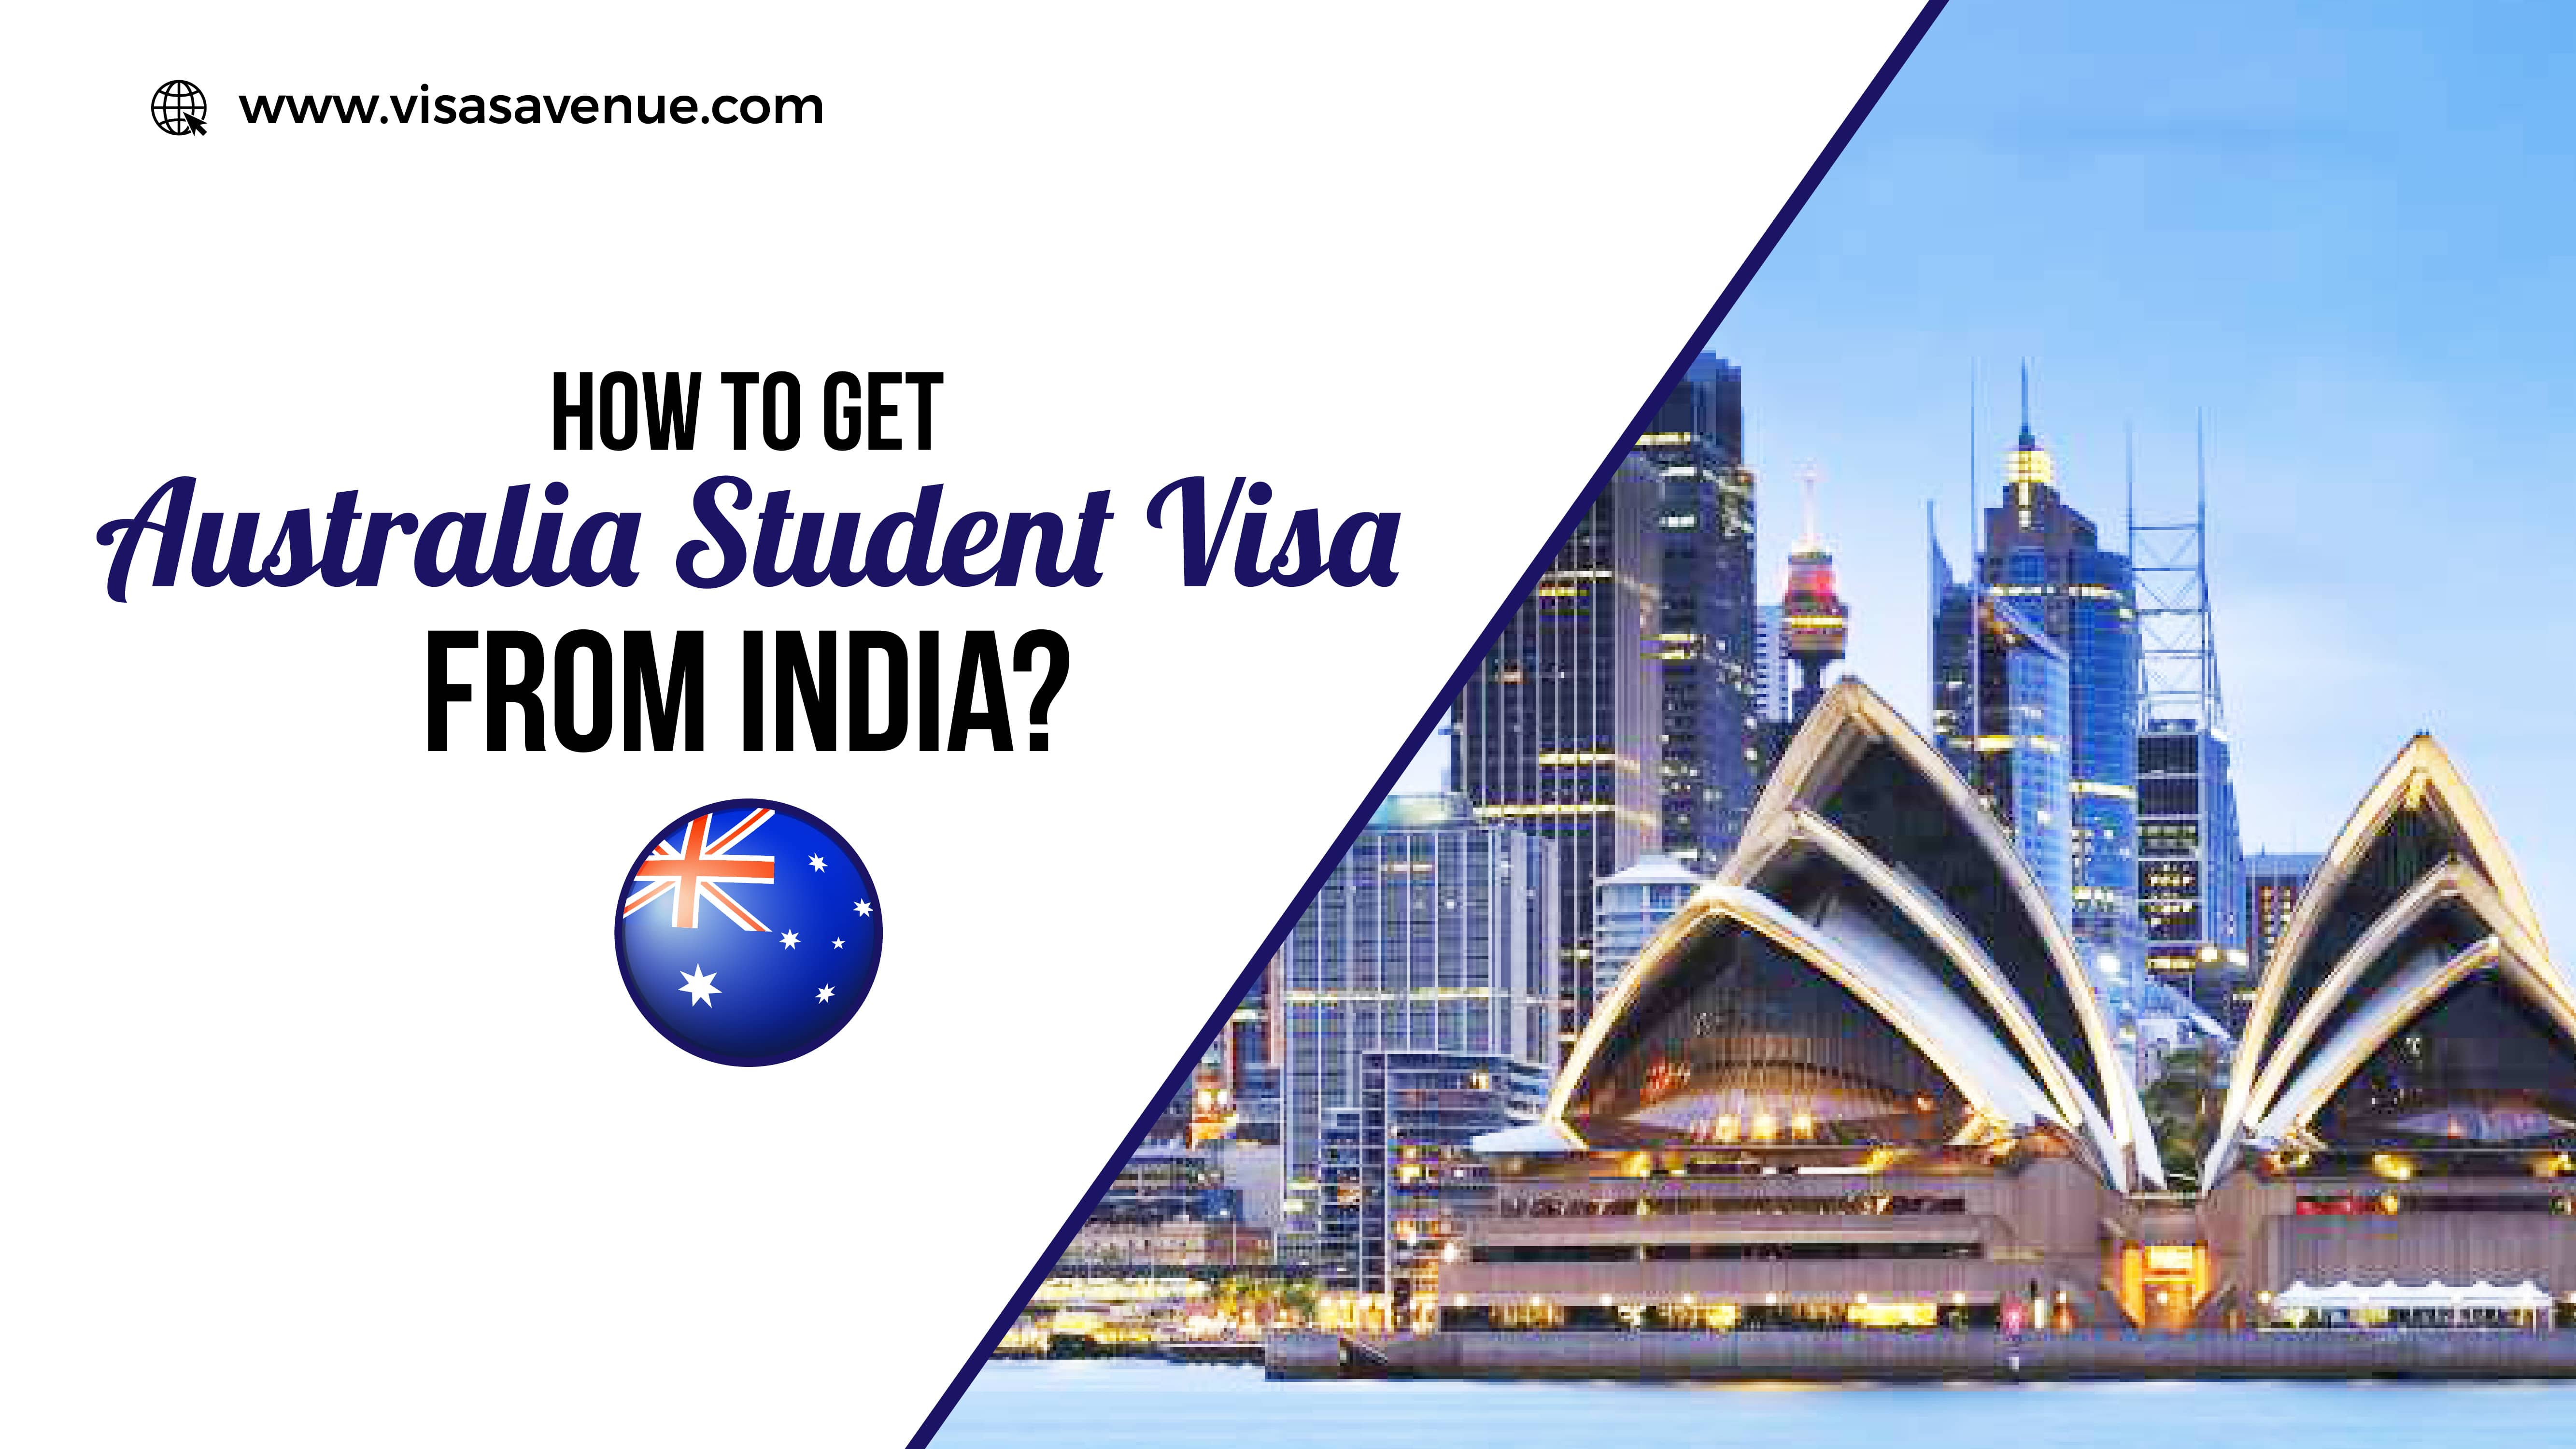 How to get Australia Student Visa from India?